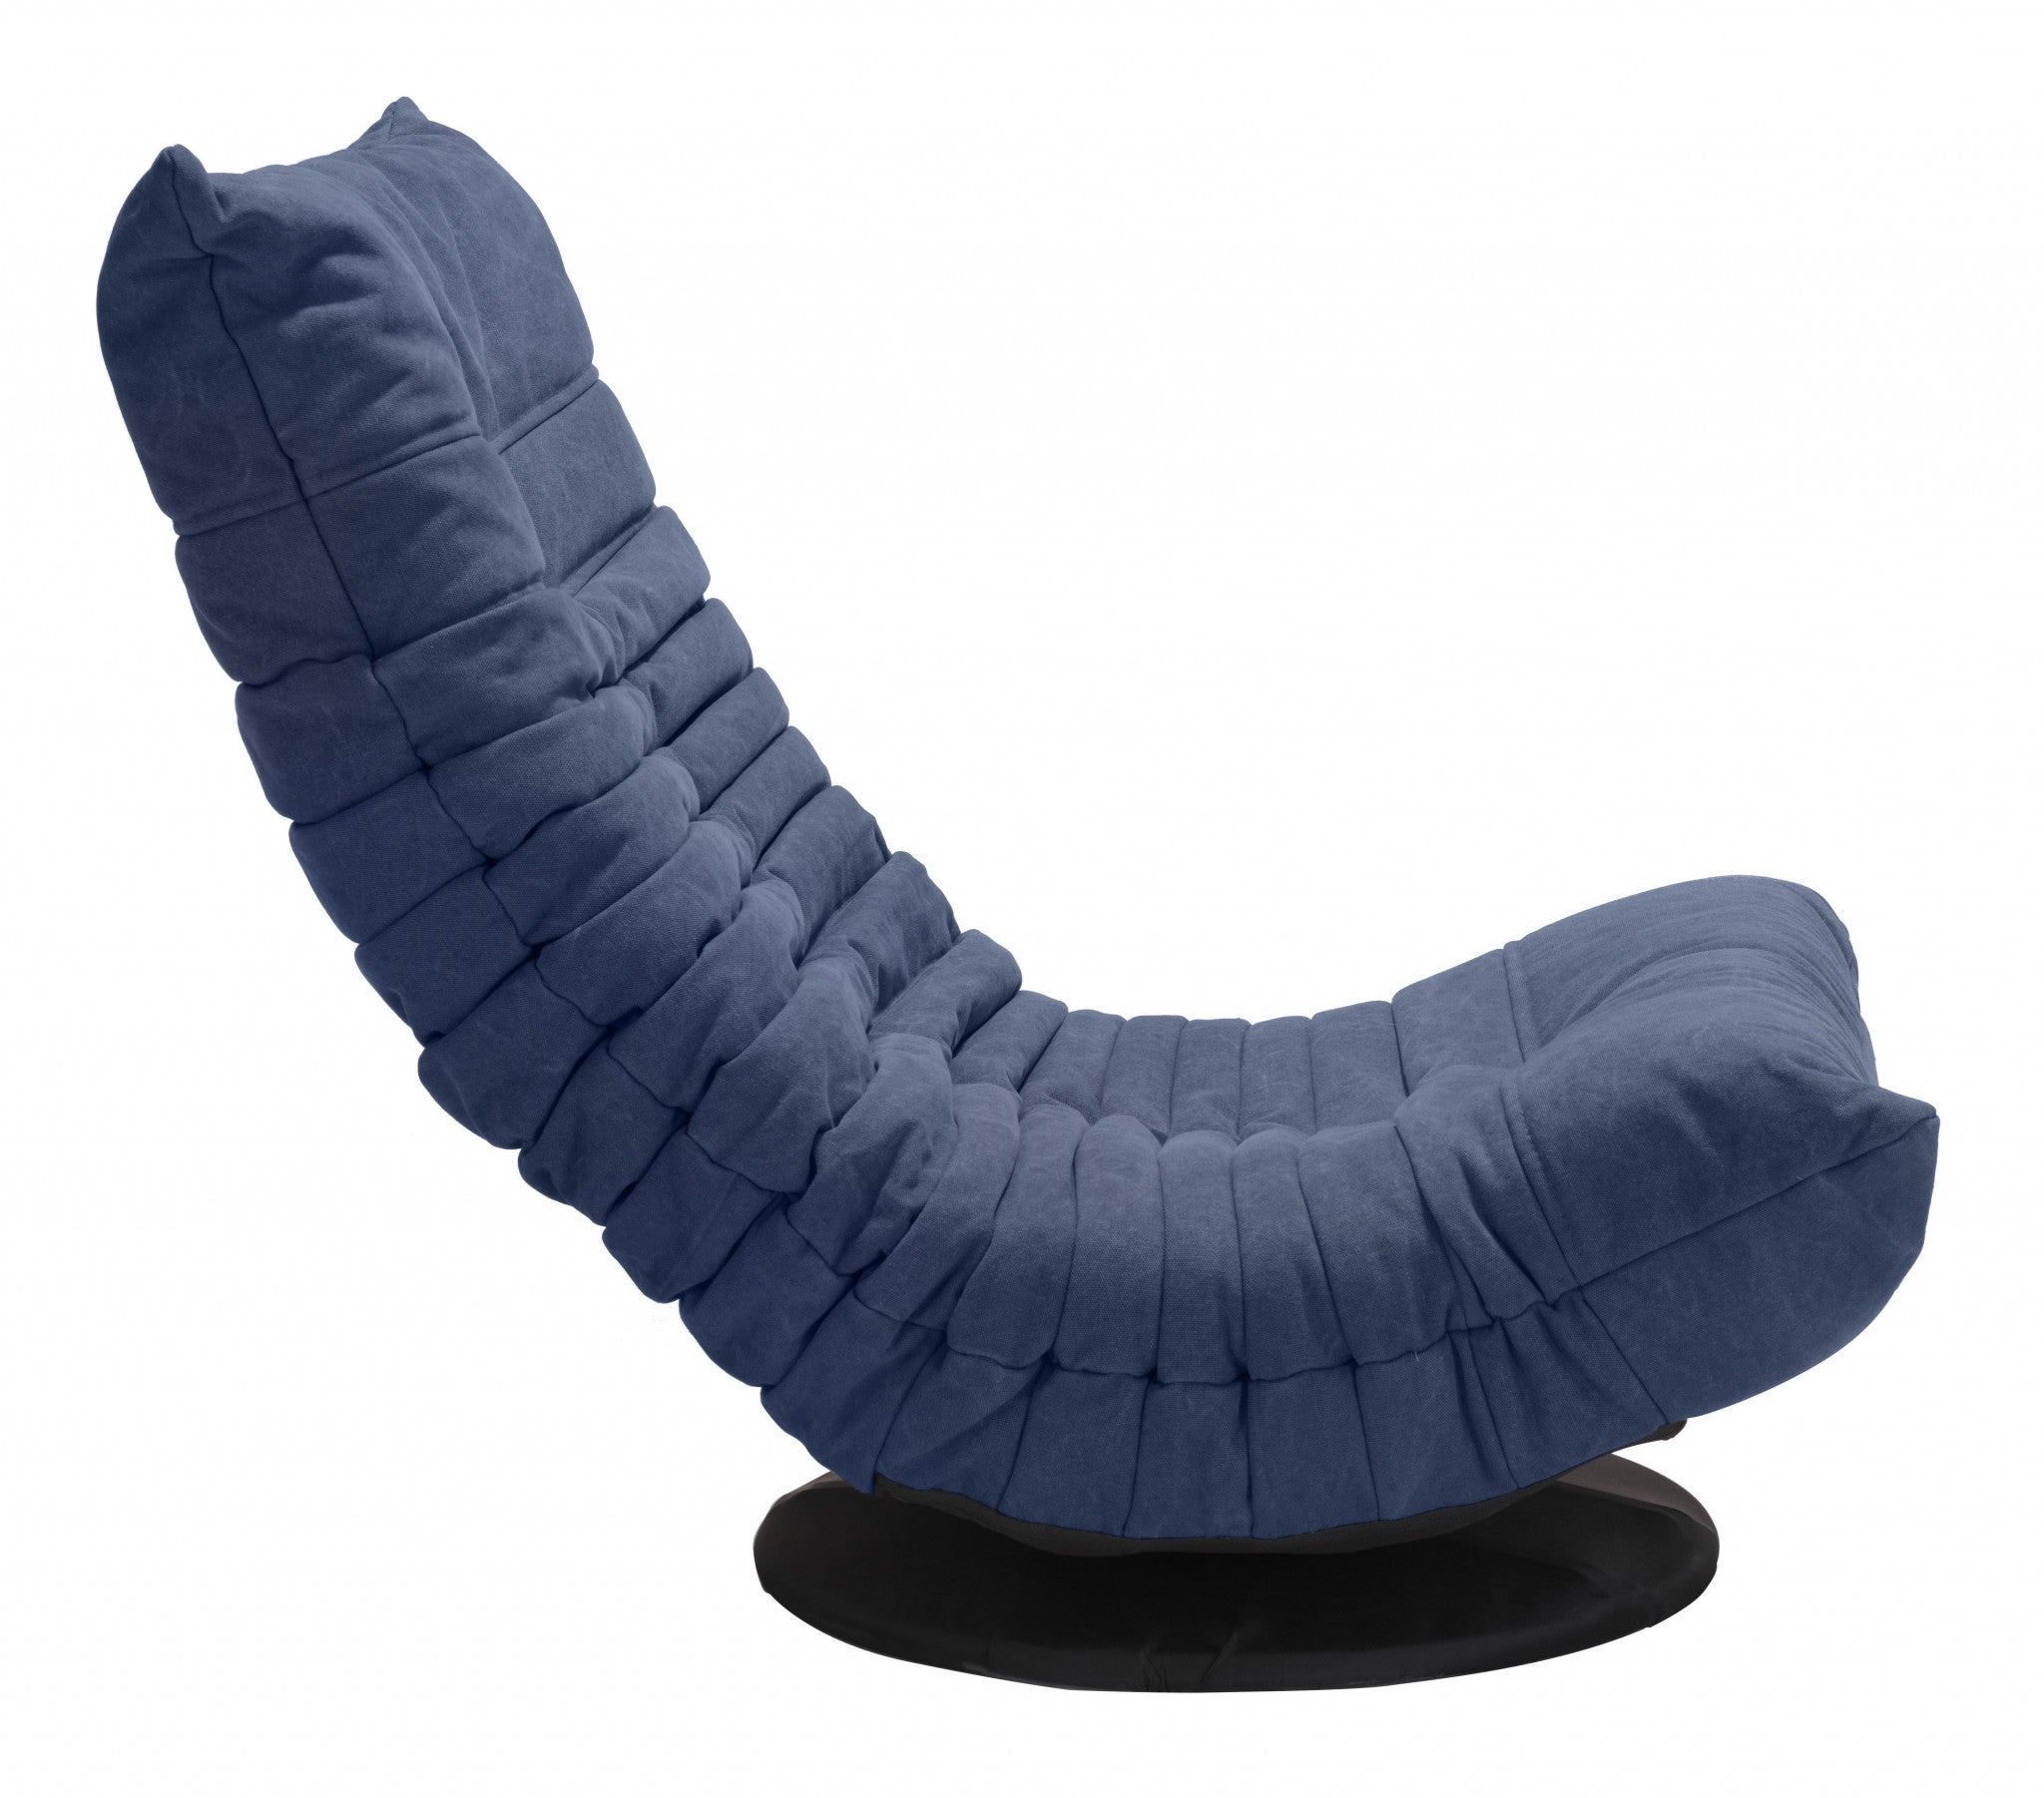 Relaxed Low Profile Cobalt Blue Swivel Chair - Tuesday Morning-Floor Chairs